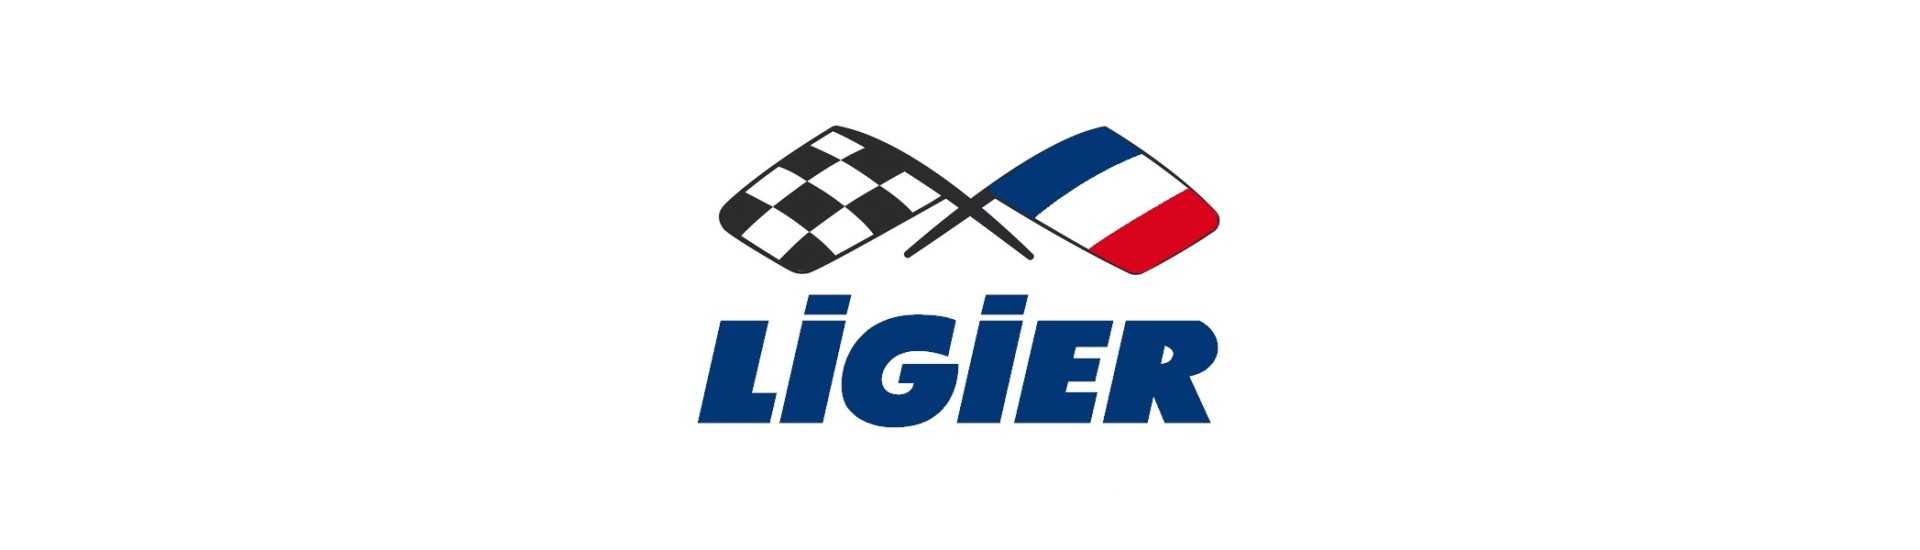 Suspension roll at best price for car without a permit Ligier